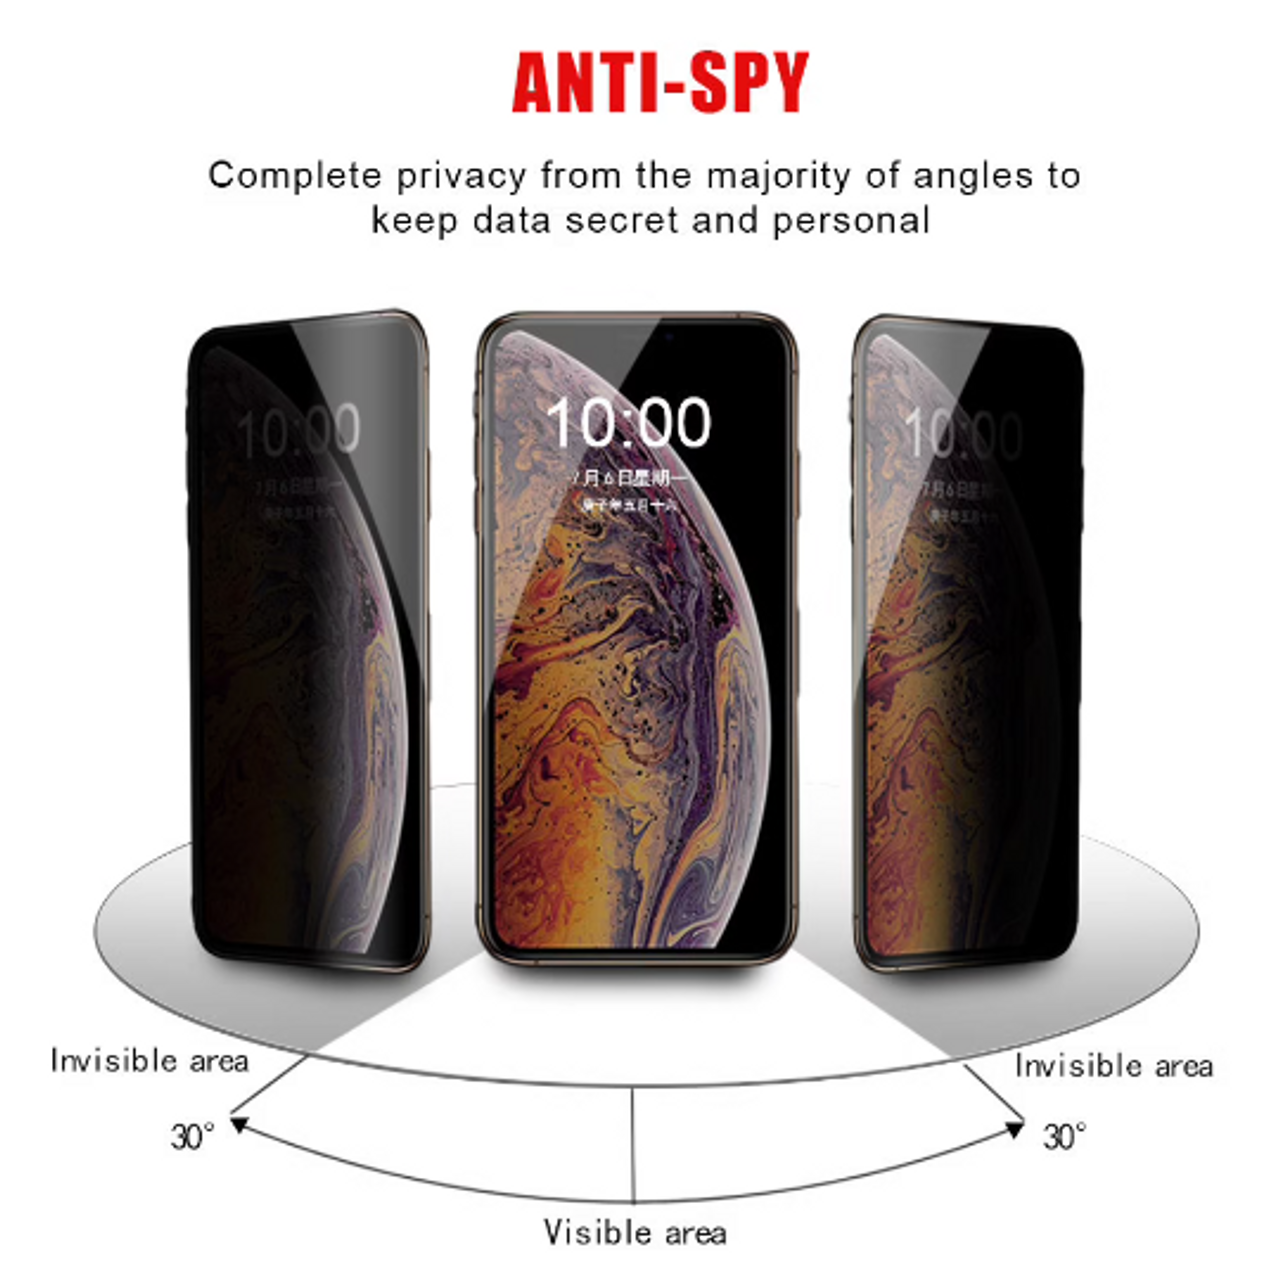 Privacy Screen Protector iPHone Xs / X